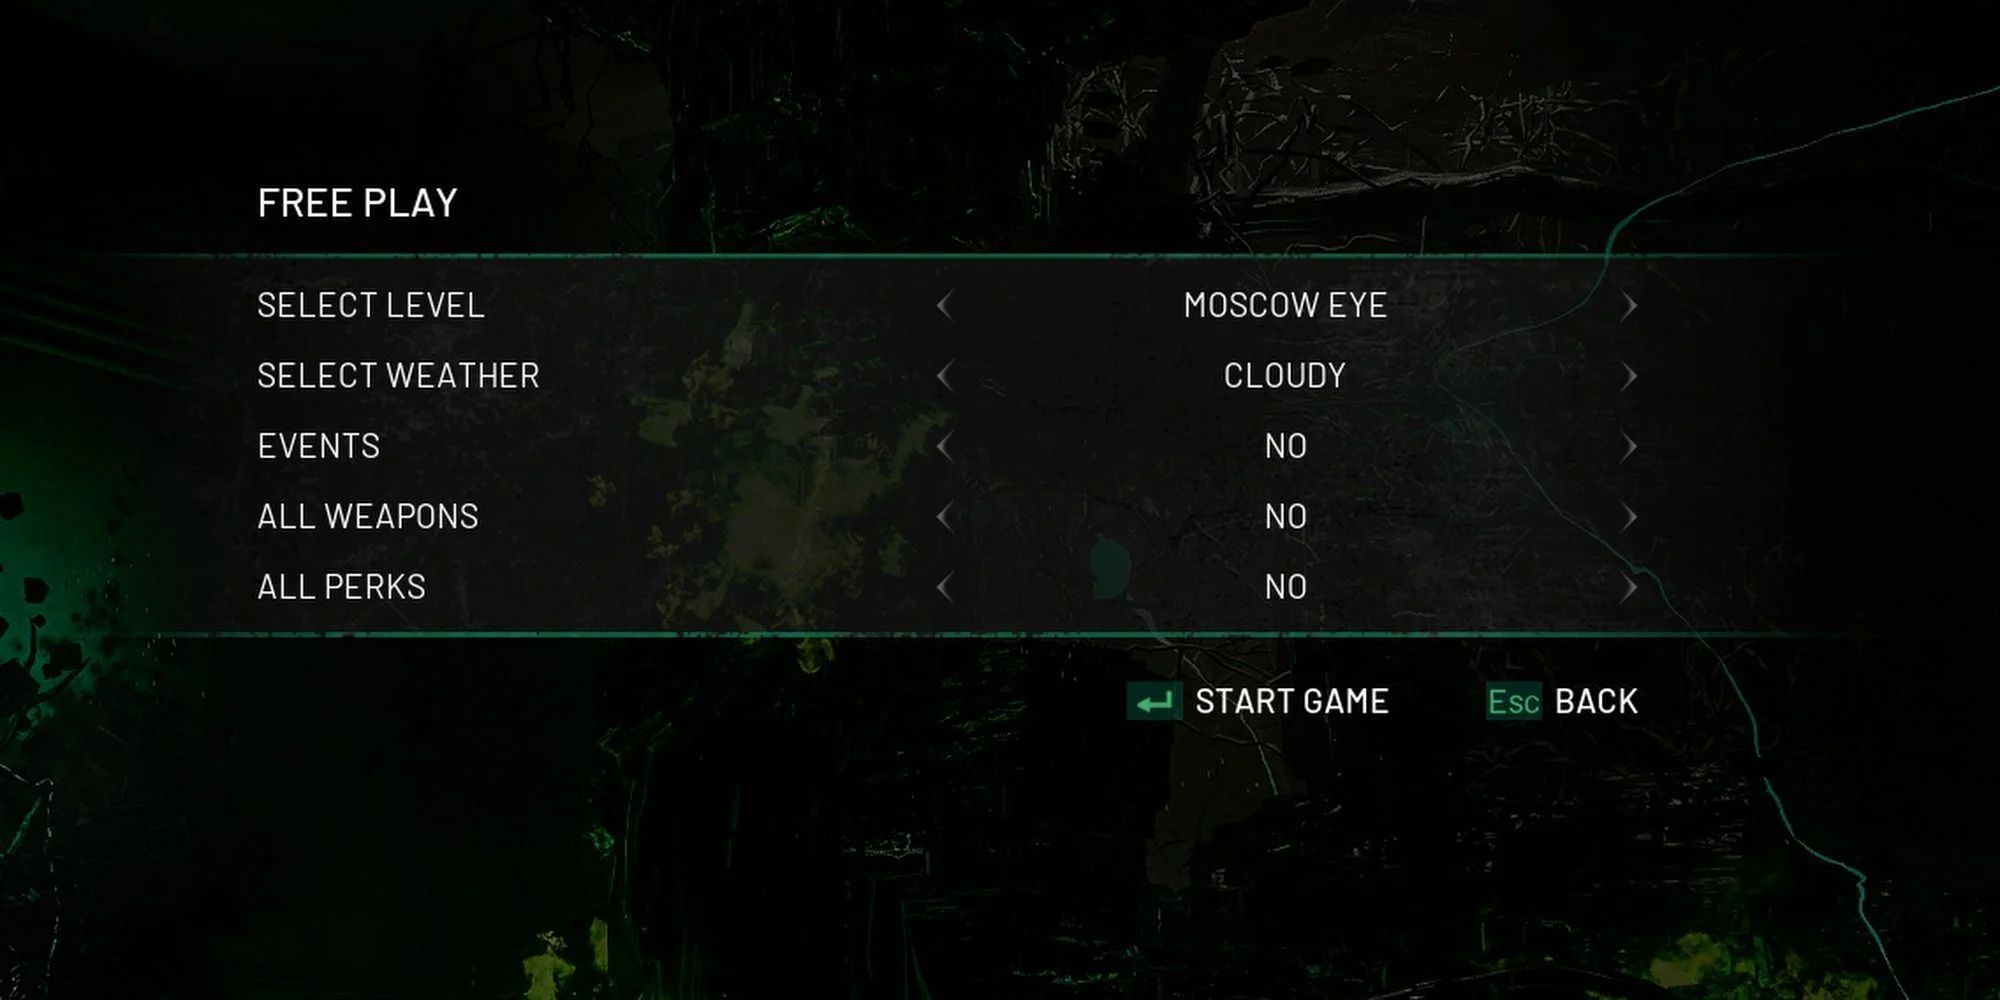 Chernobylite - Free Play Mode Options